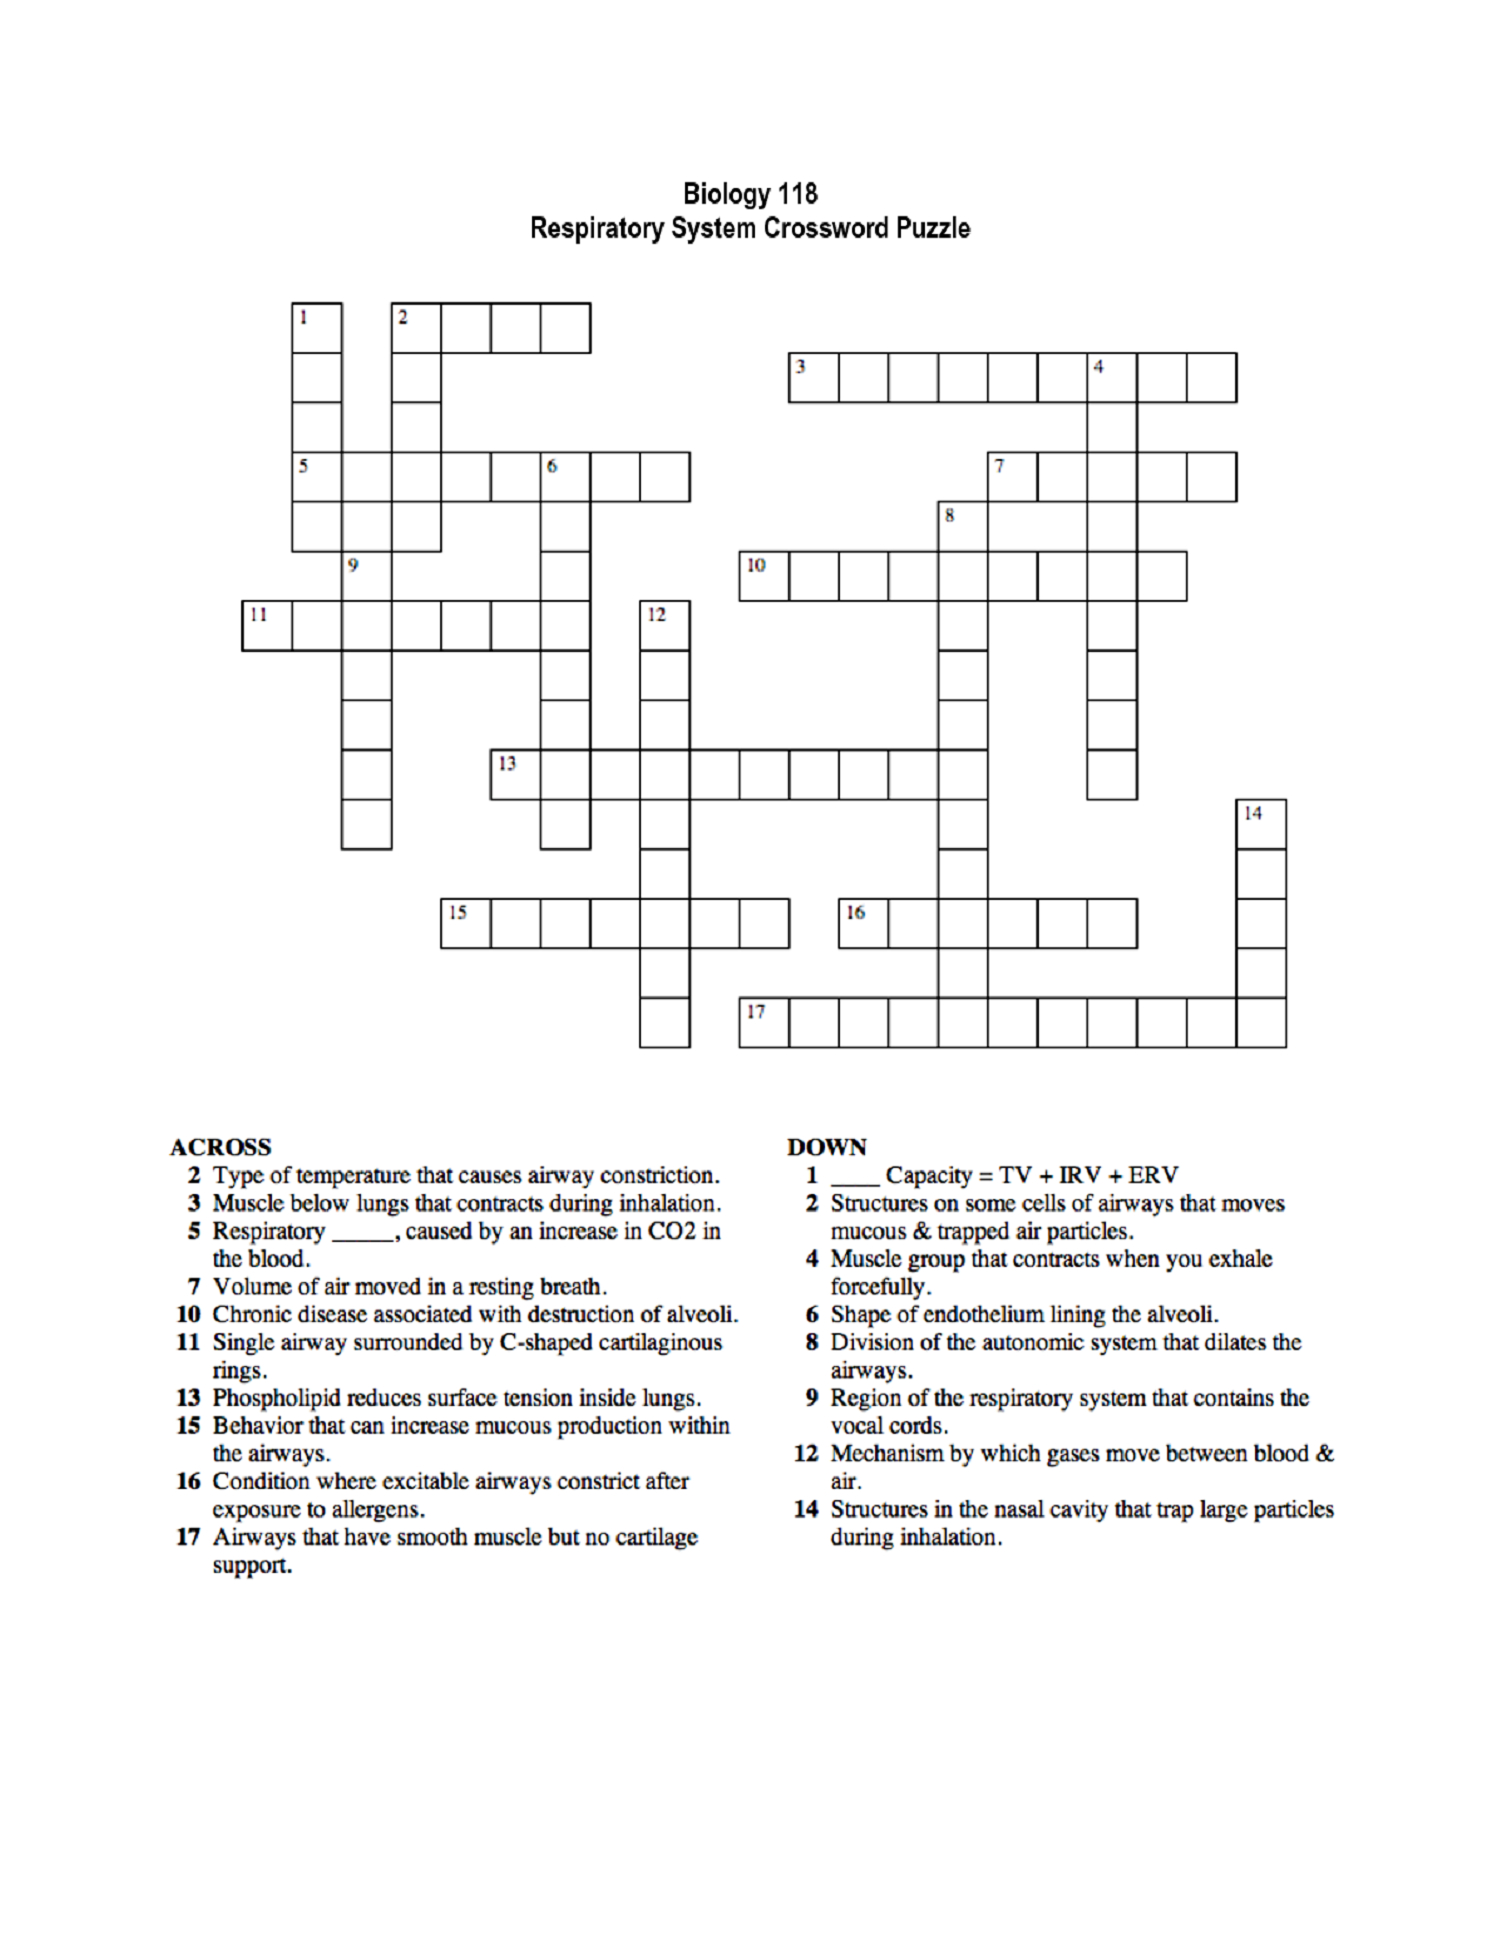 Respiratory Systems Crossword For Word Therapy | Dear Joya - Respiratory System Crossword Puzzle Printable